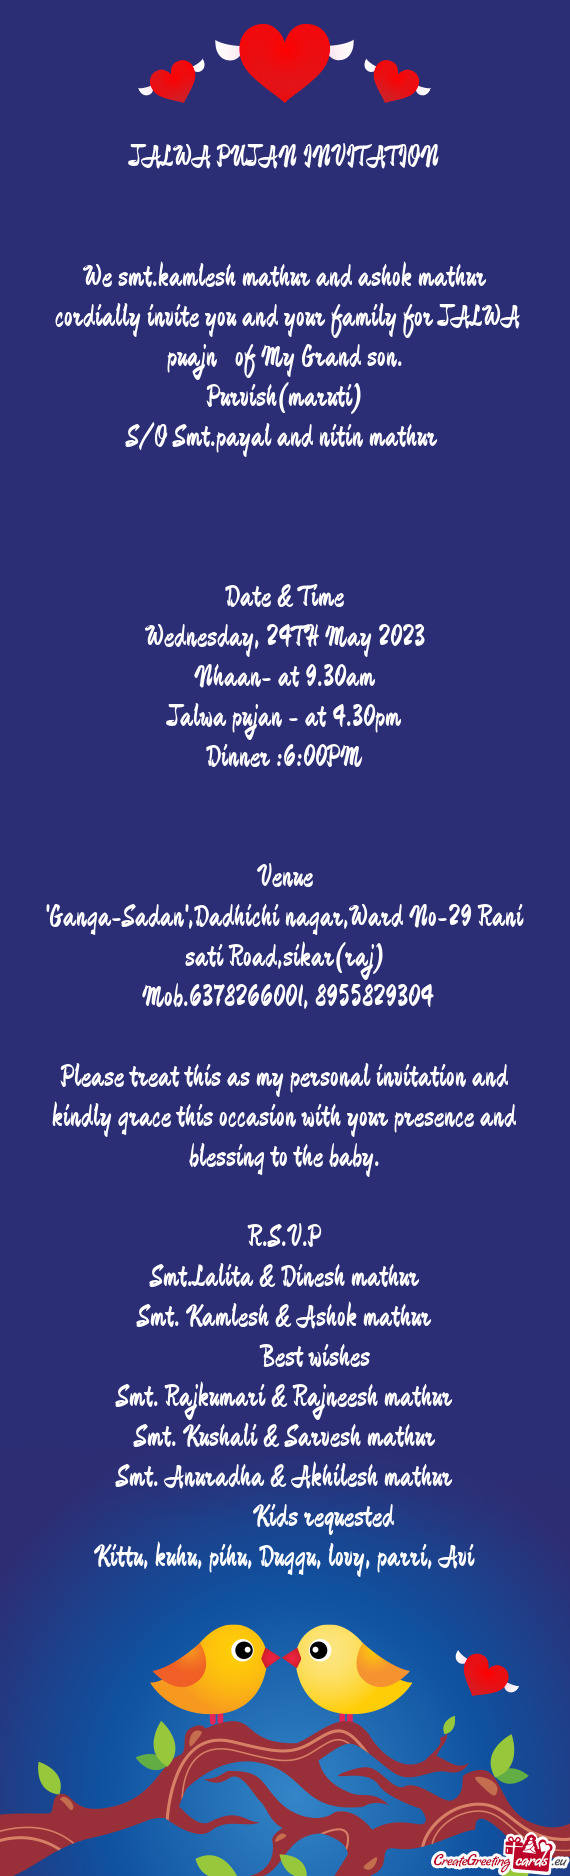 Cordially invite you and your family for JALWA puajn of My Grand son